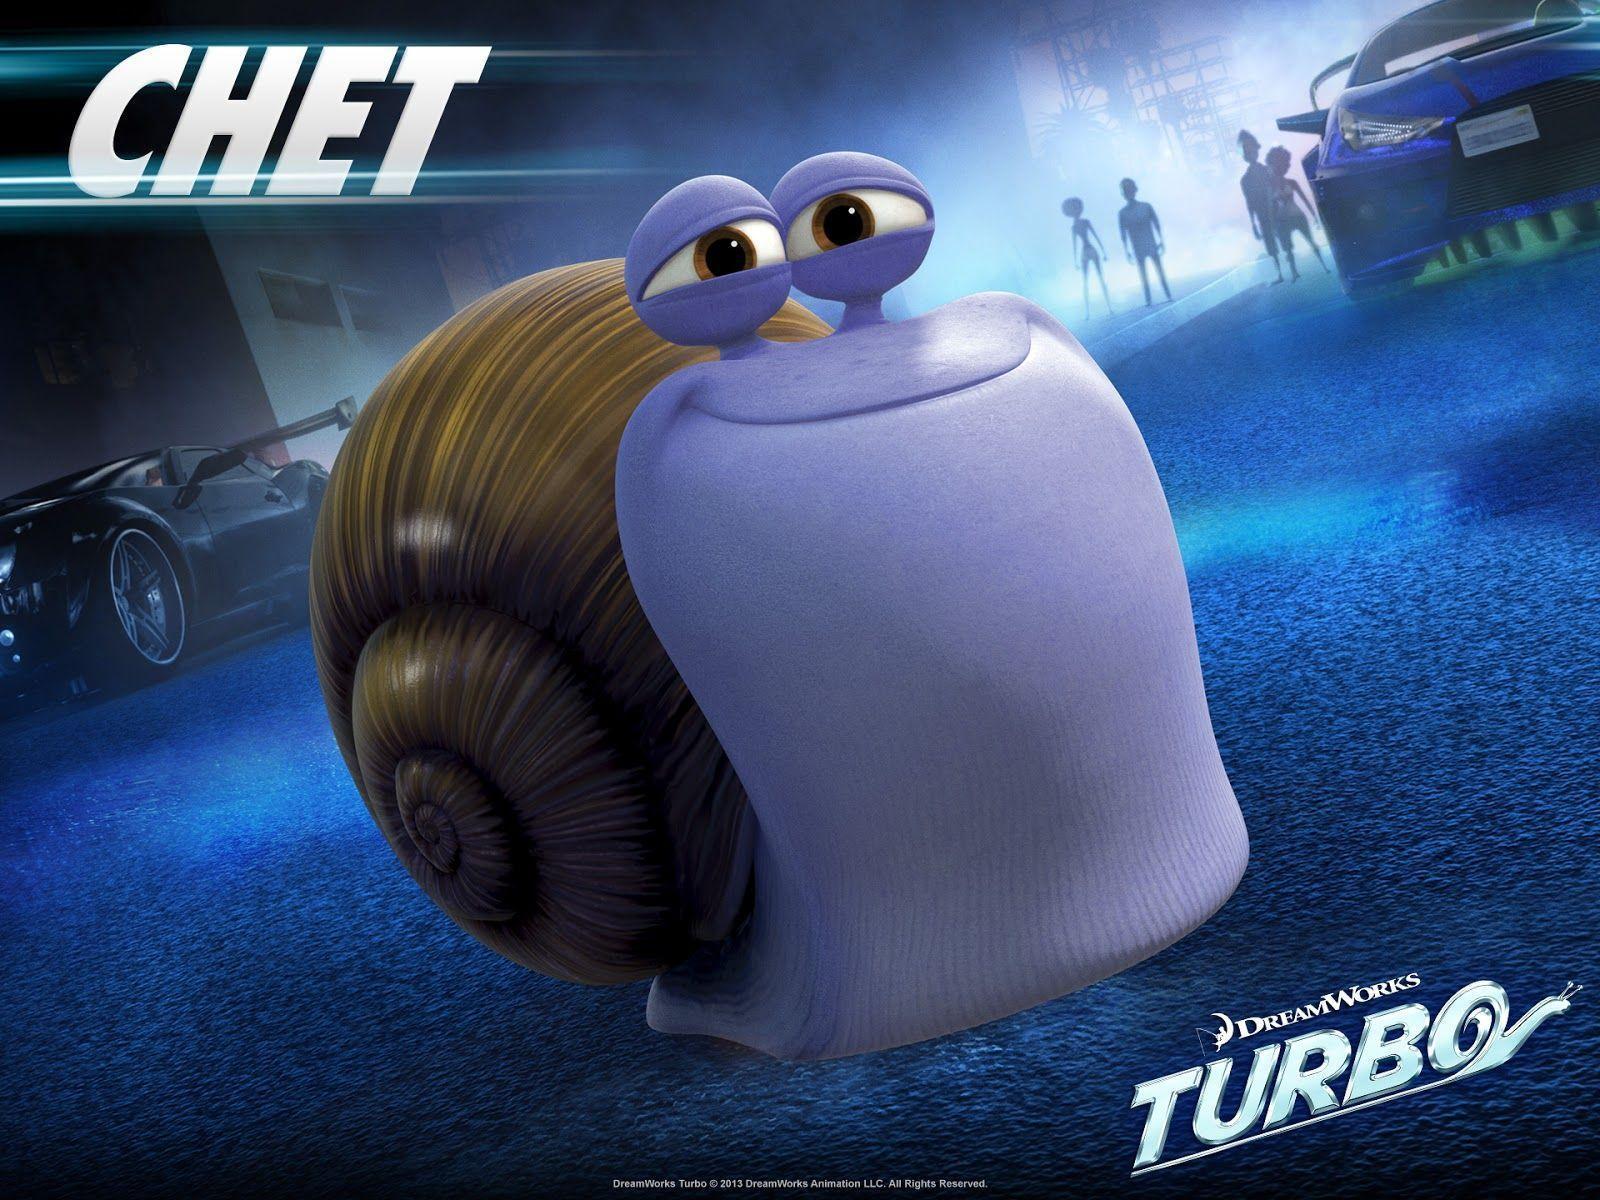 DreamWorks Turbo Movie HD Wallpaper Character Posters Download